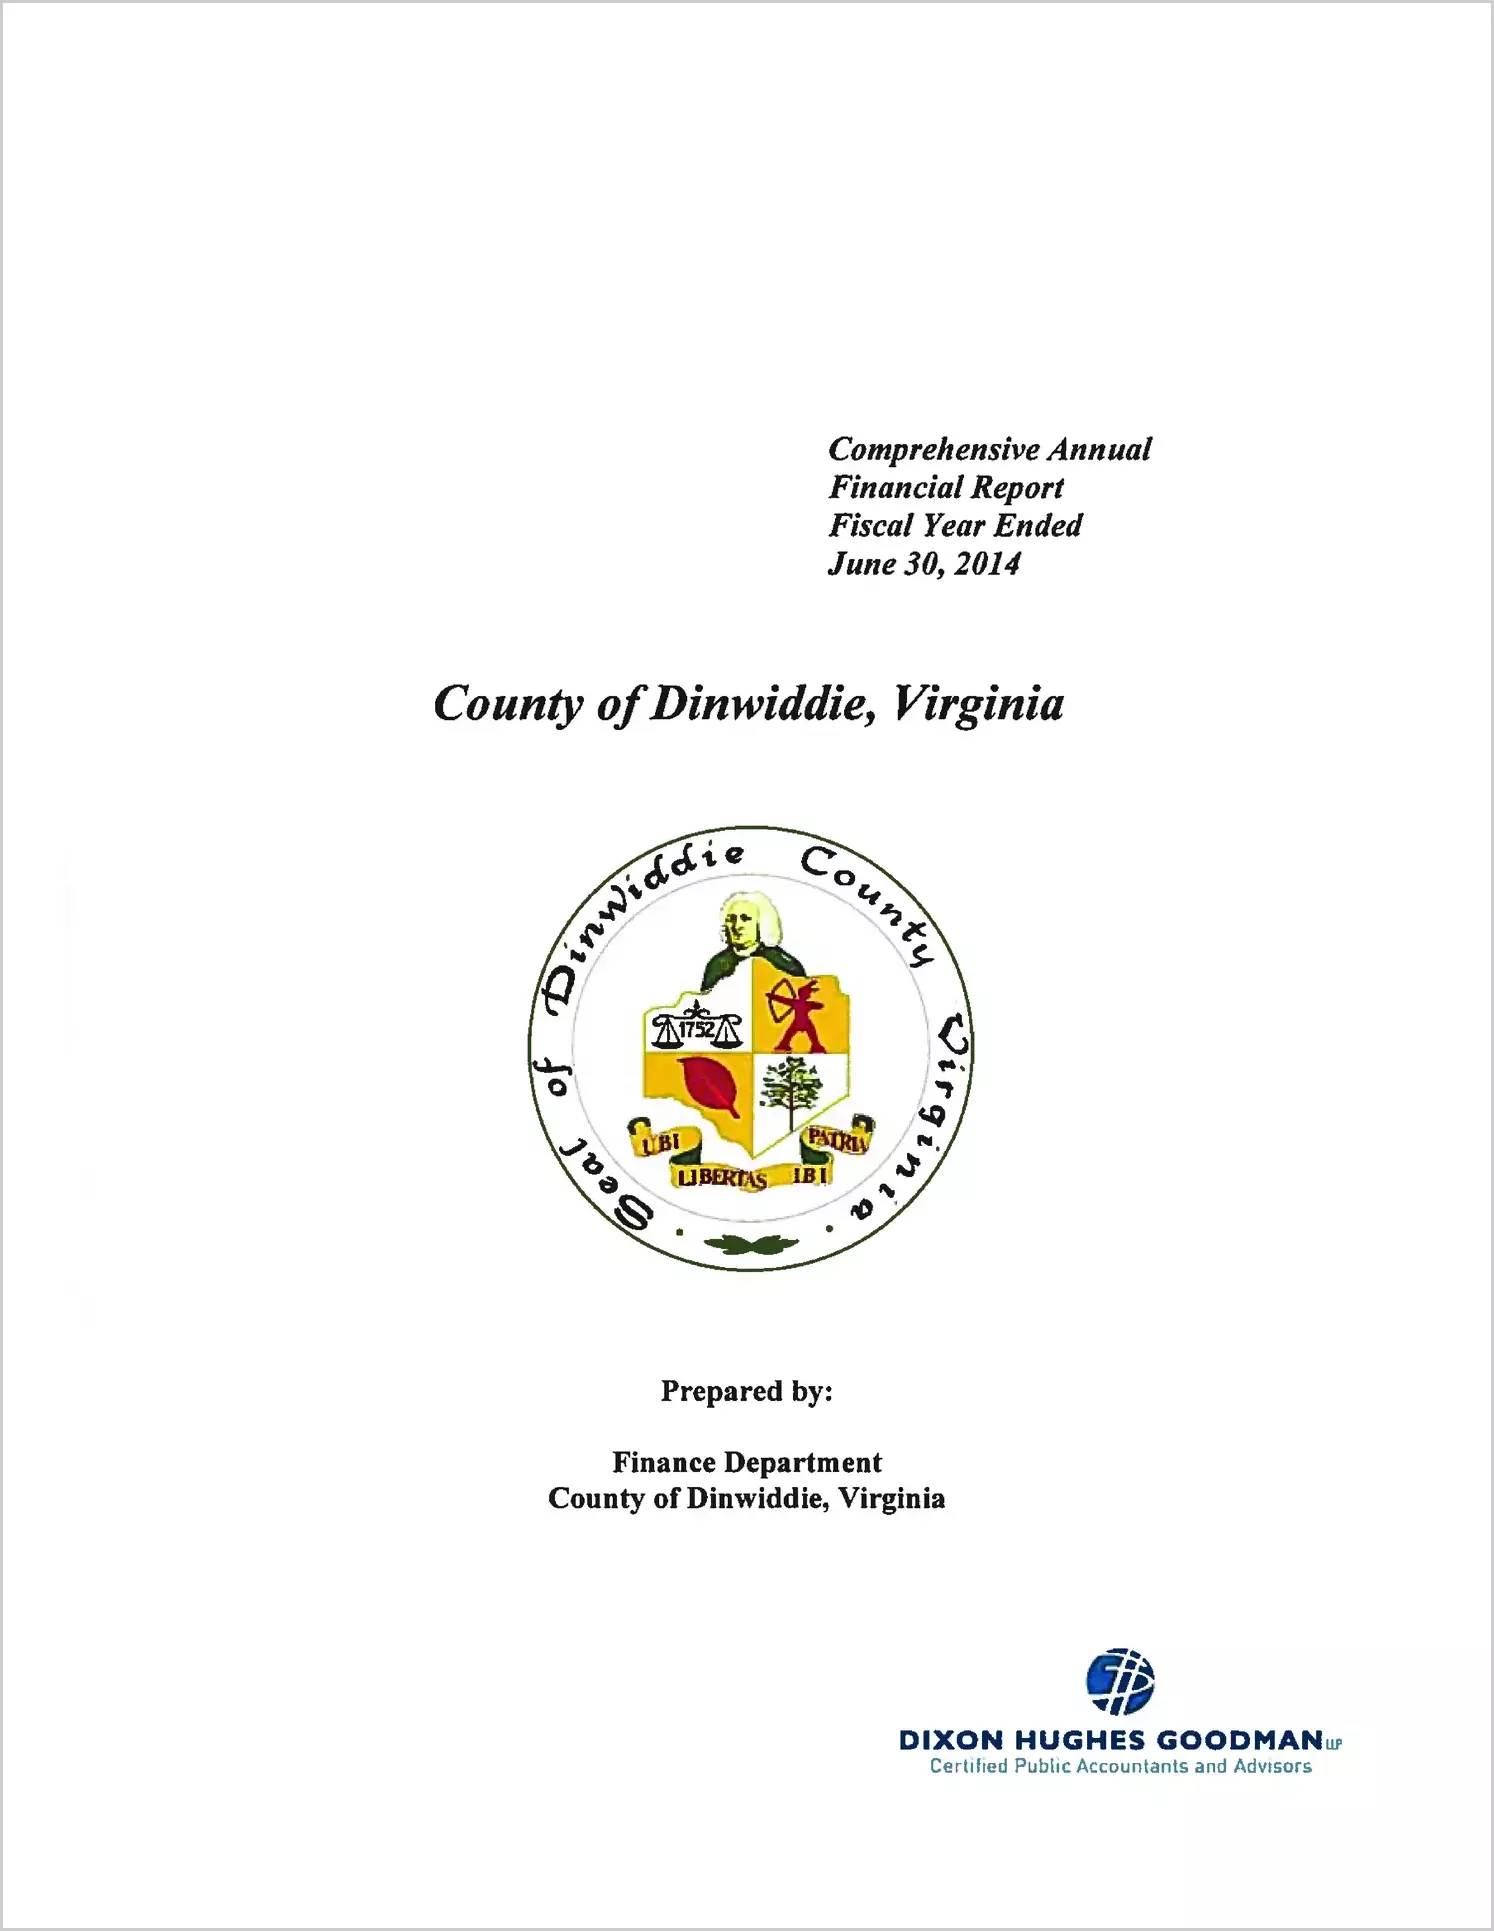 2014 Annual Financial Report for County of Dinwiddie